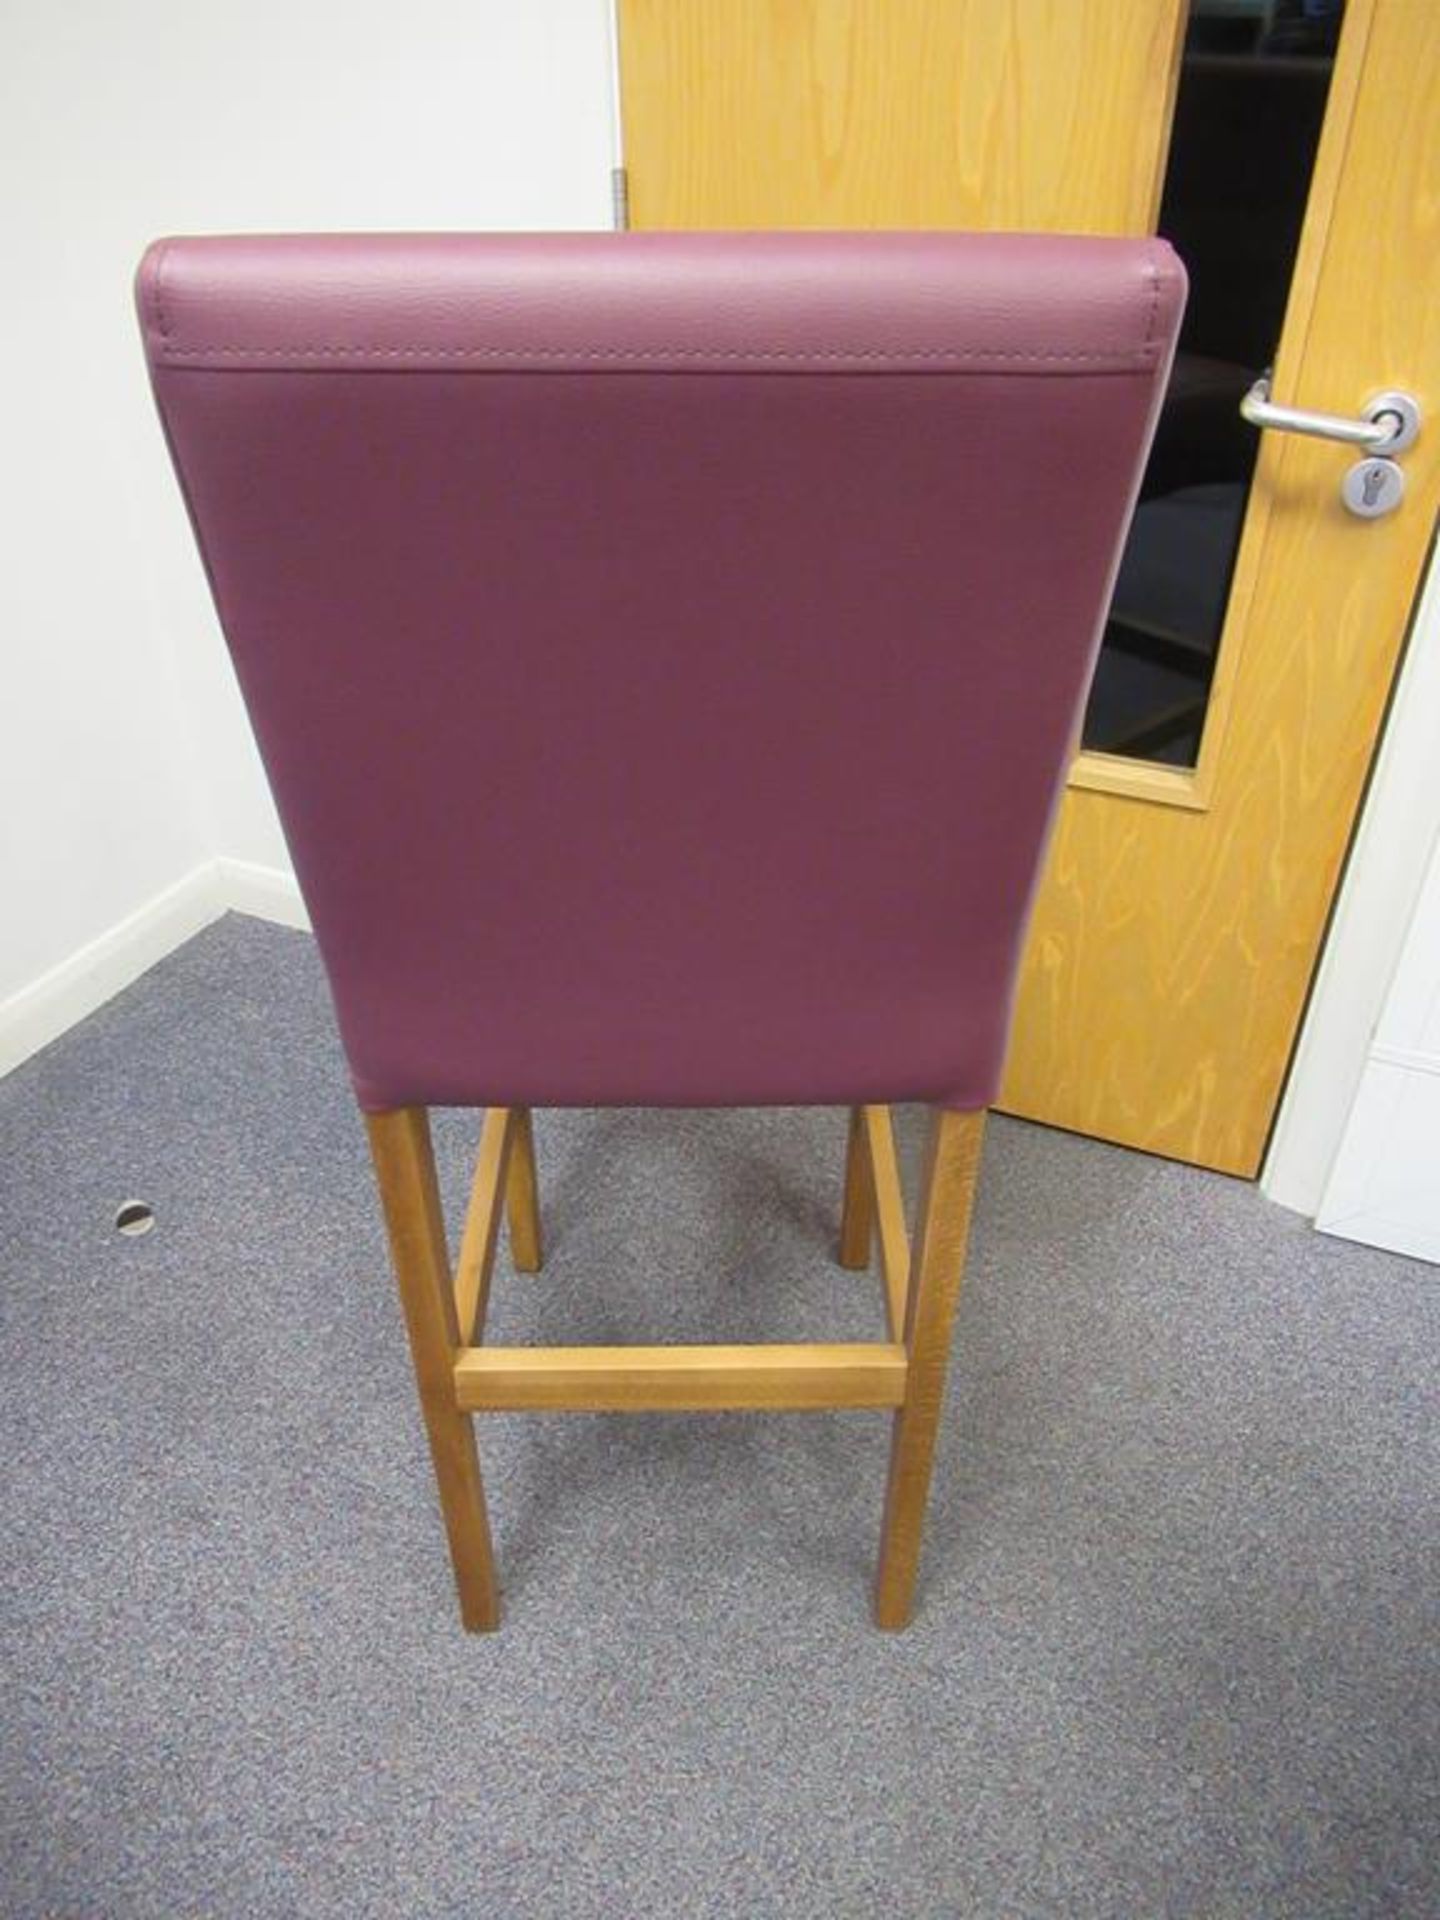 Two Leather Barstools - 1x Wine, 1x Gum. - Image 6 of 7